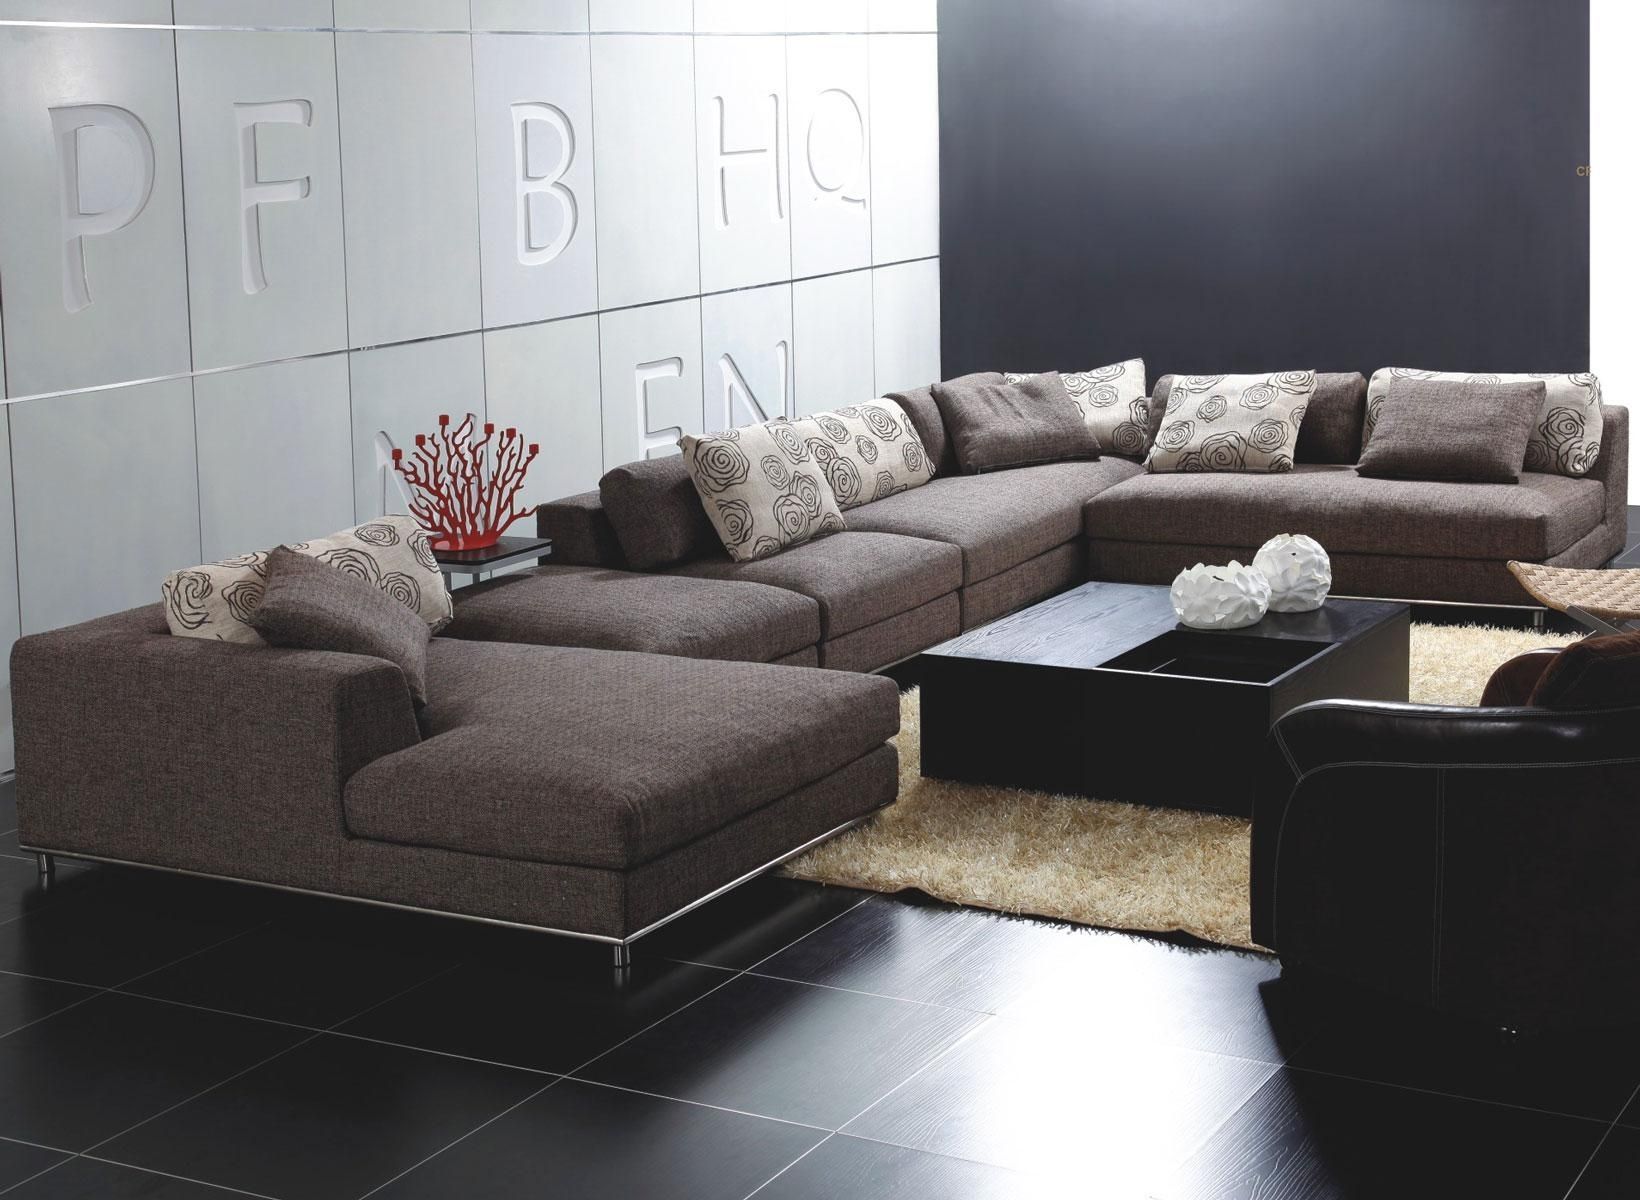 Cheap Sectional Sofas In Calgary | Functionalities Inside Sectional Sofas At Calgary (View 1 of 10)